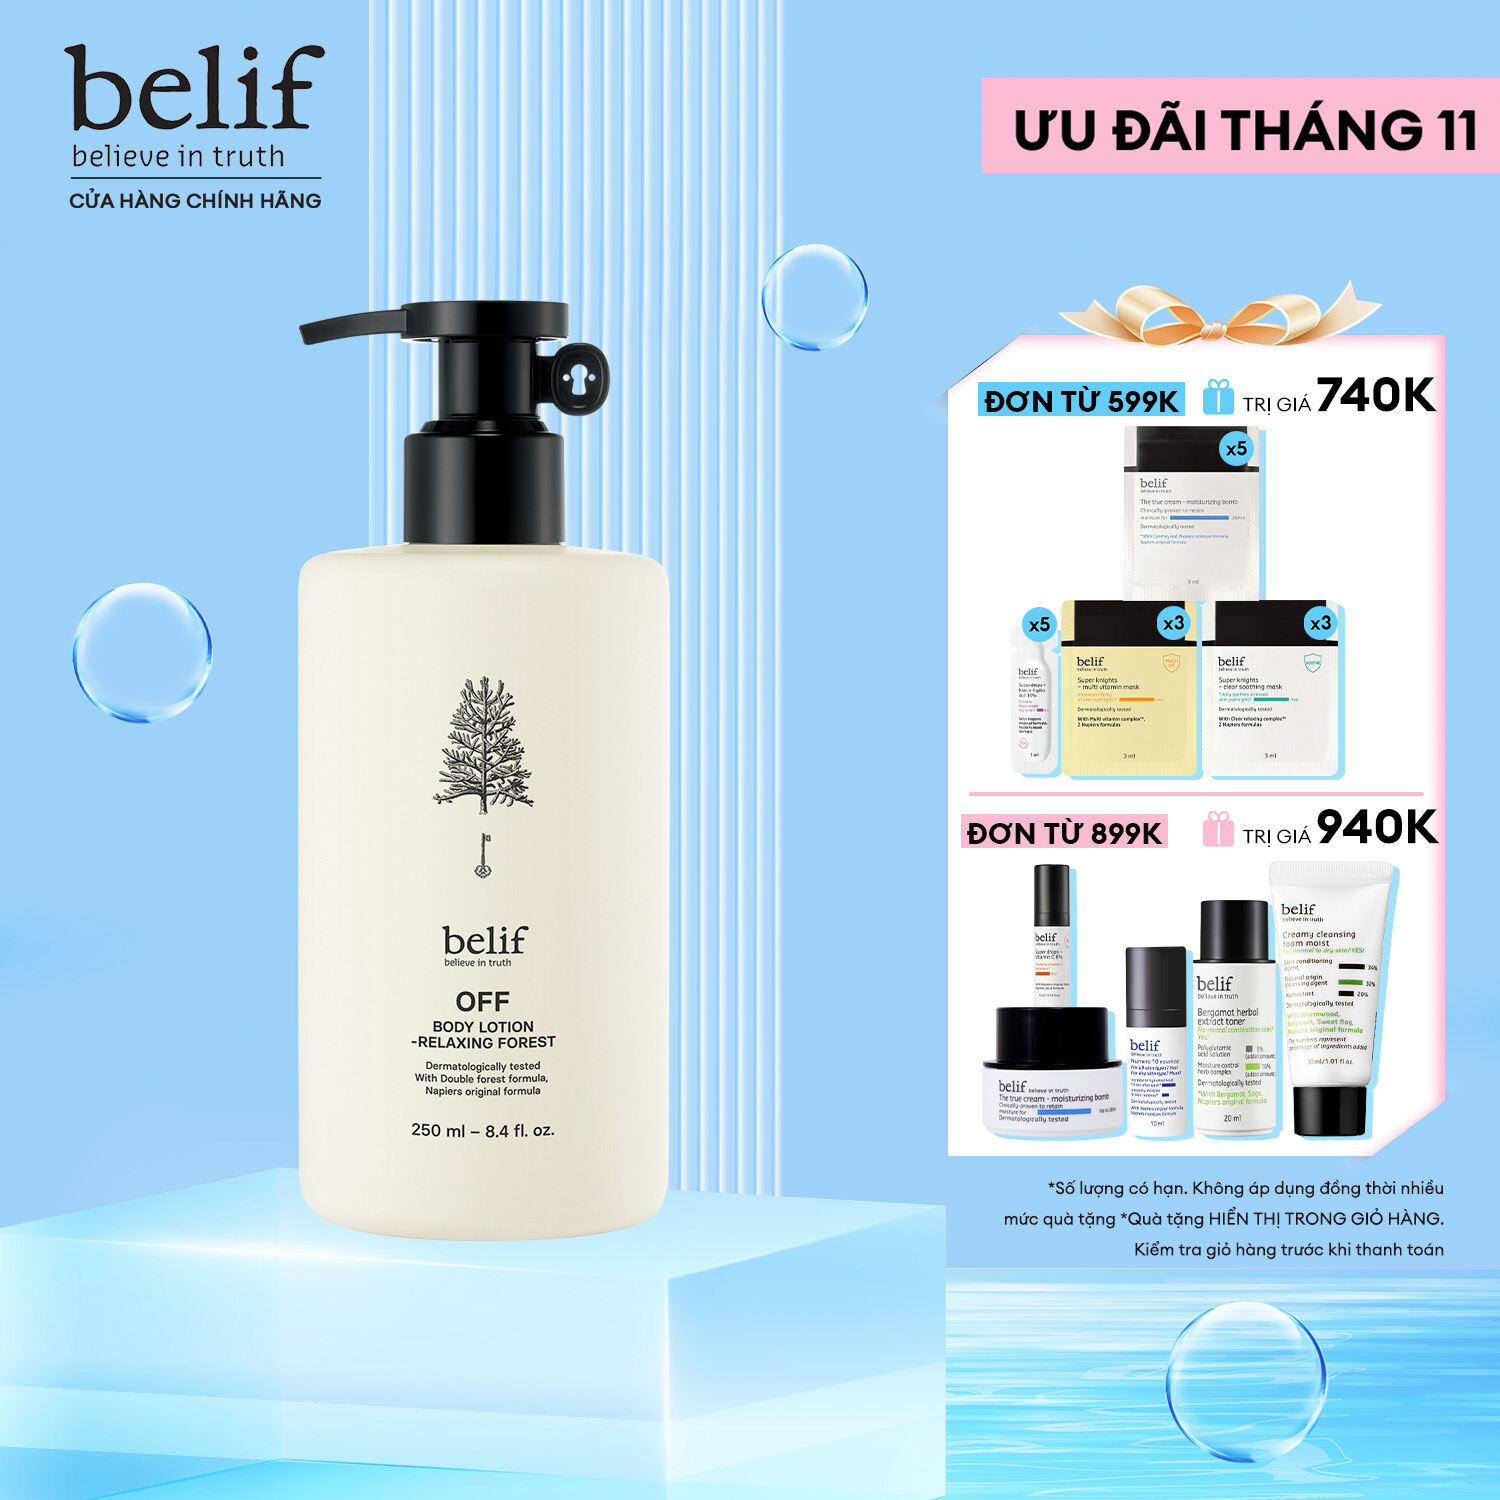 Sữa dưỡng thể belif Body Lotion Relaxing Forest 250ml